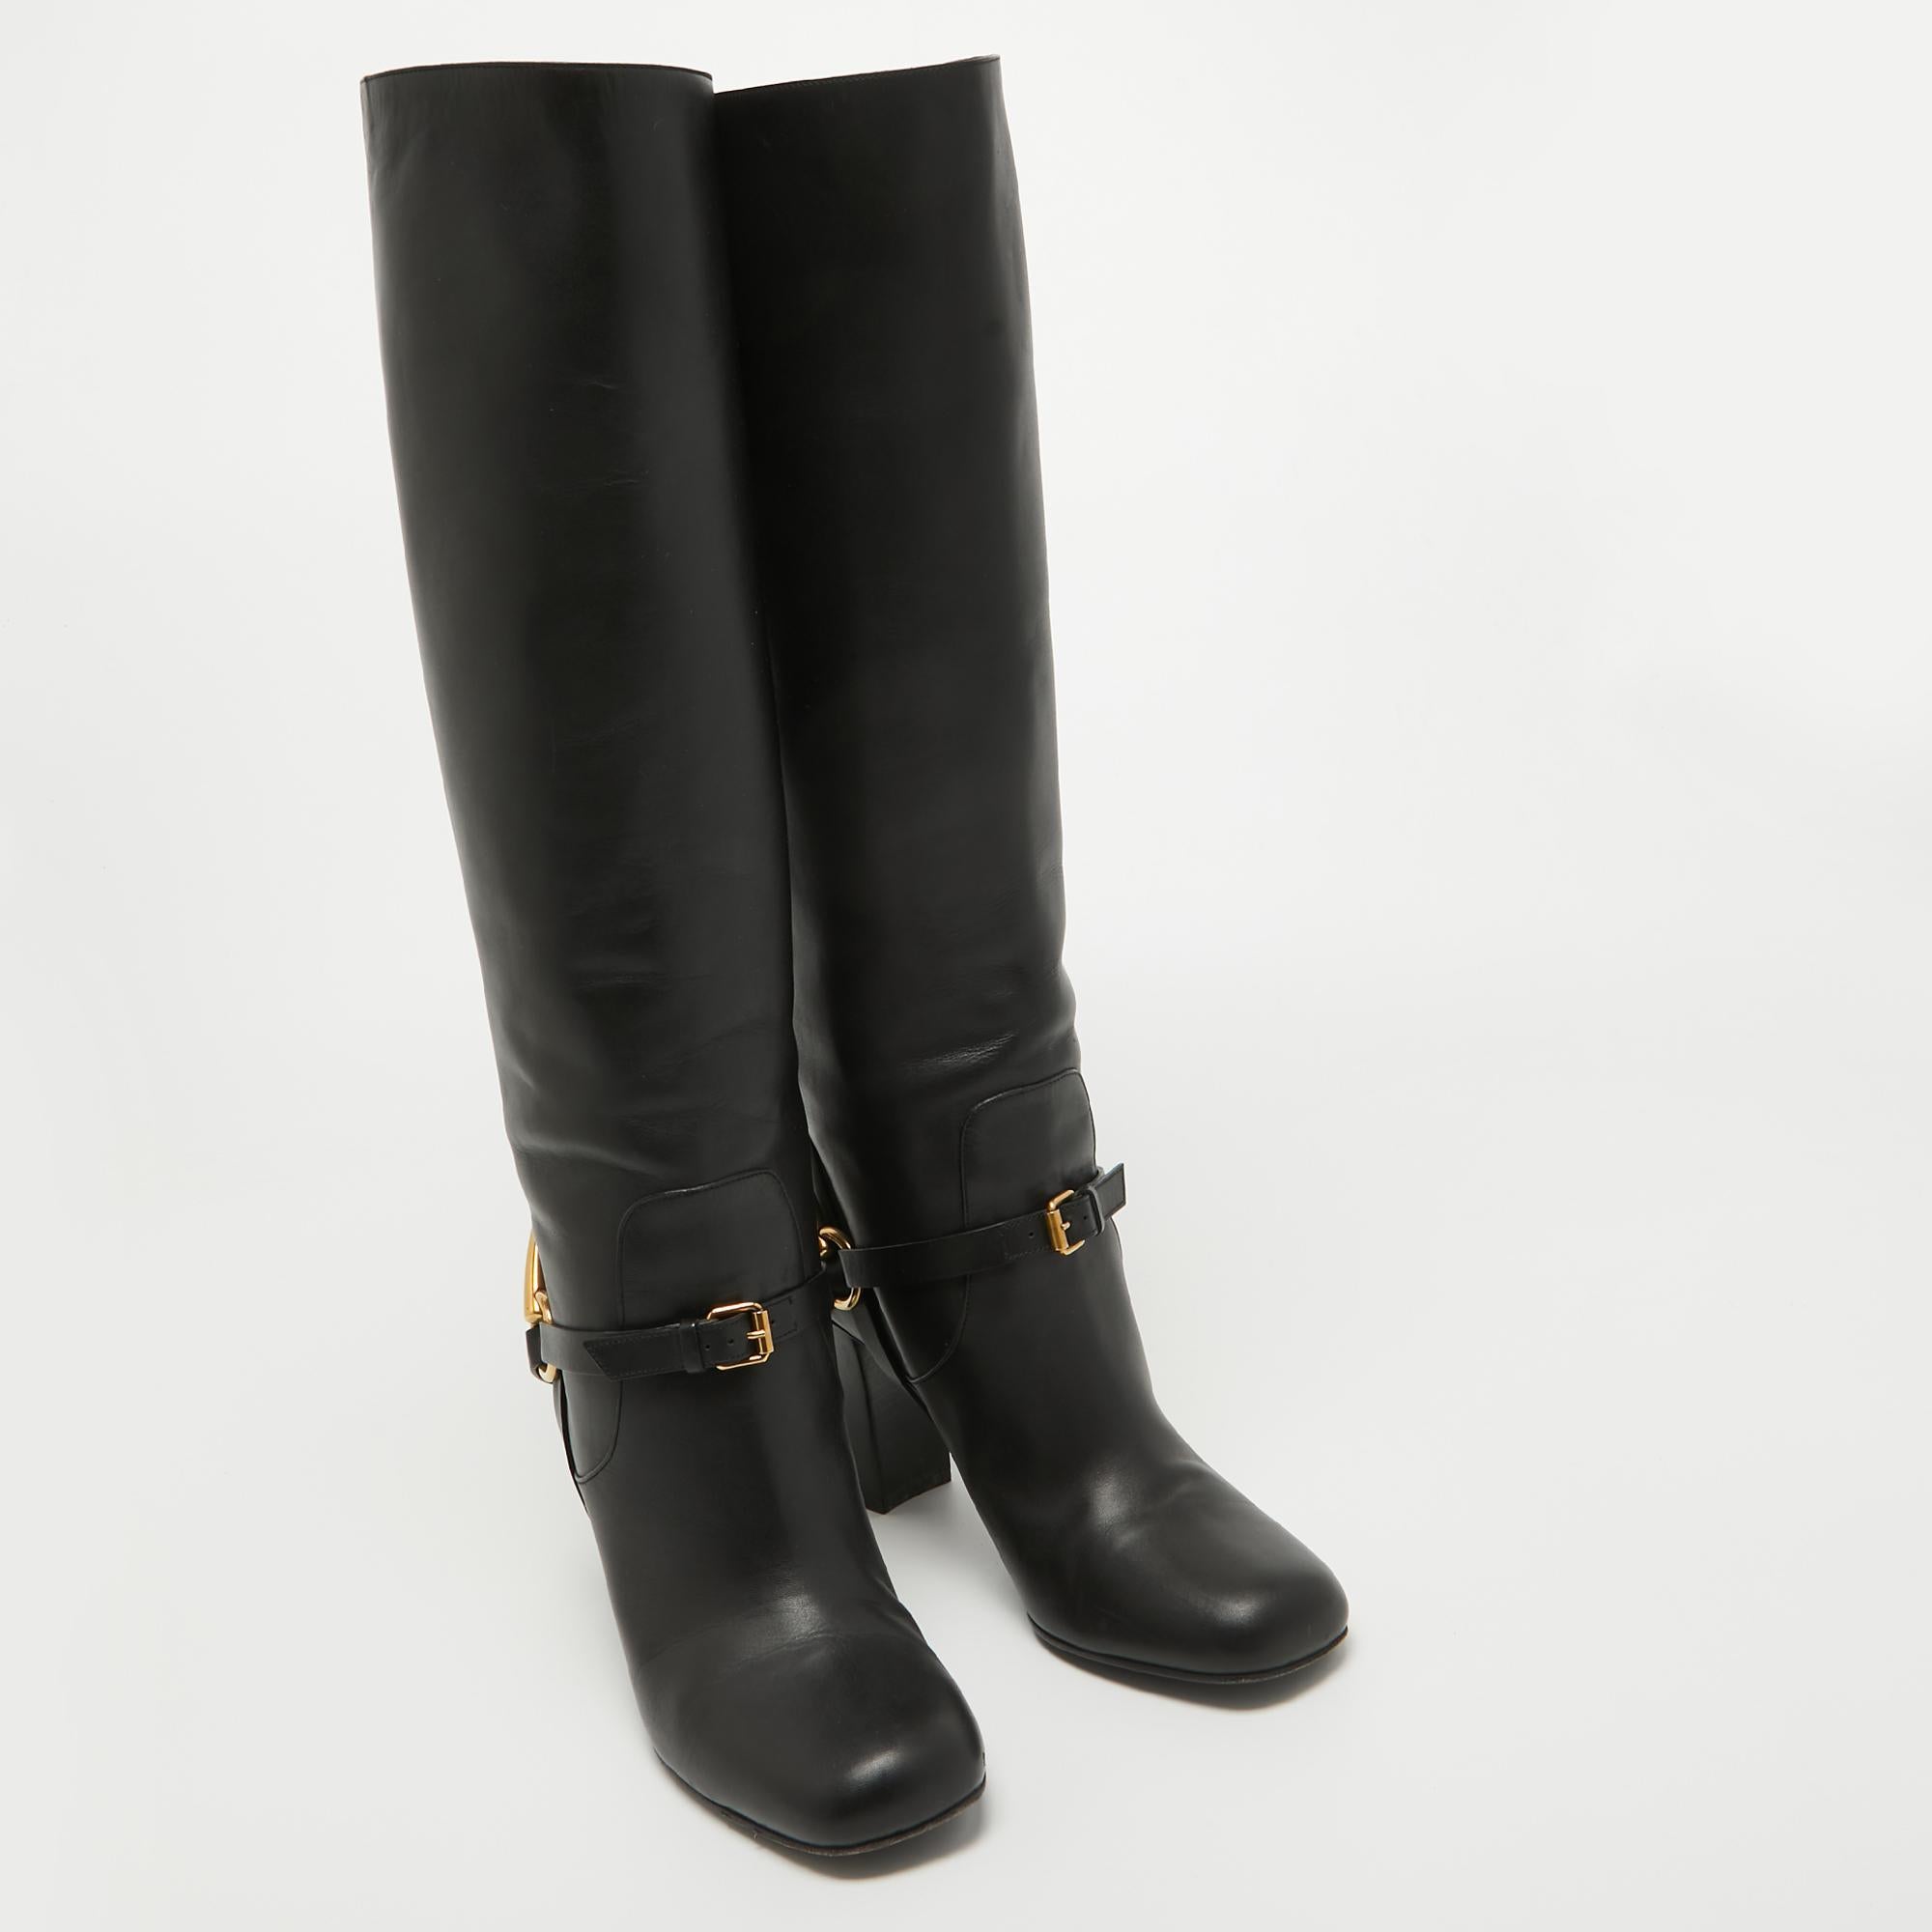 Gucci Black Leather Horsebit Knee Length Boots Size 36.5 For Sale 2